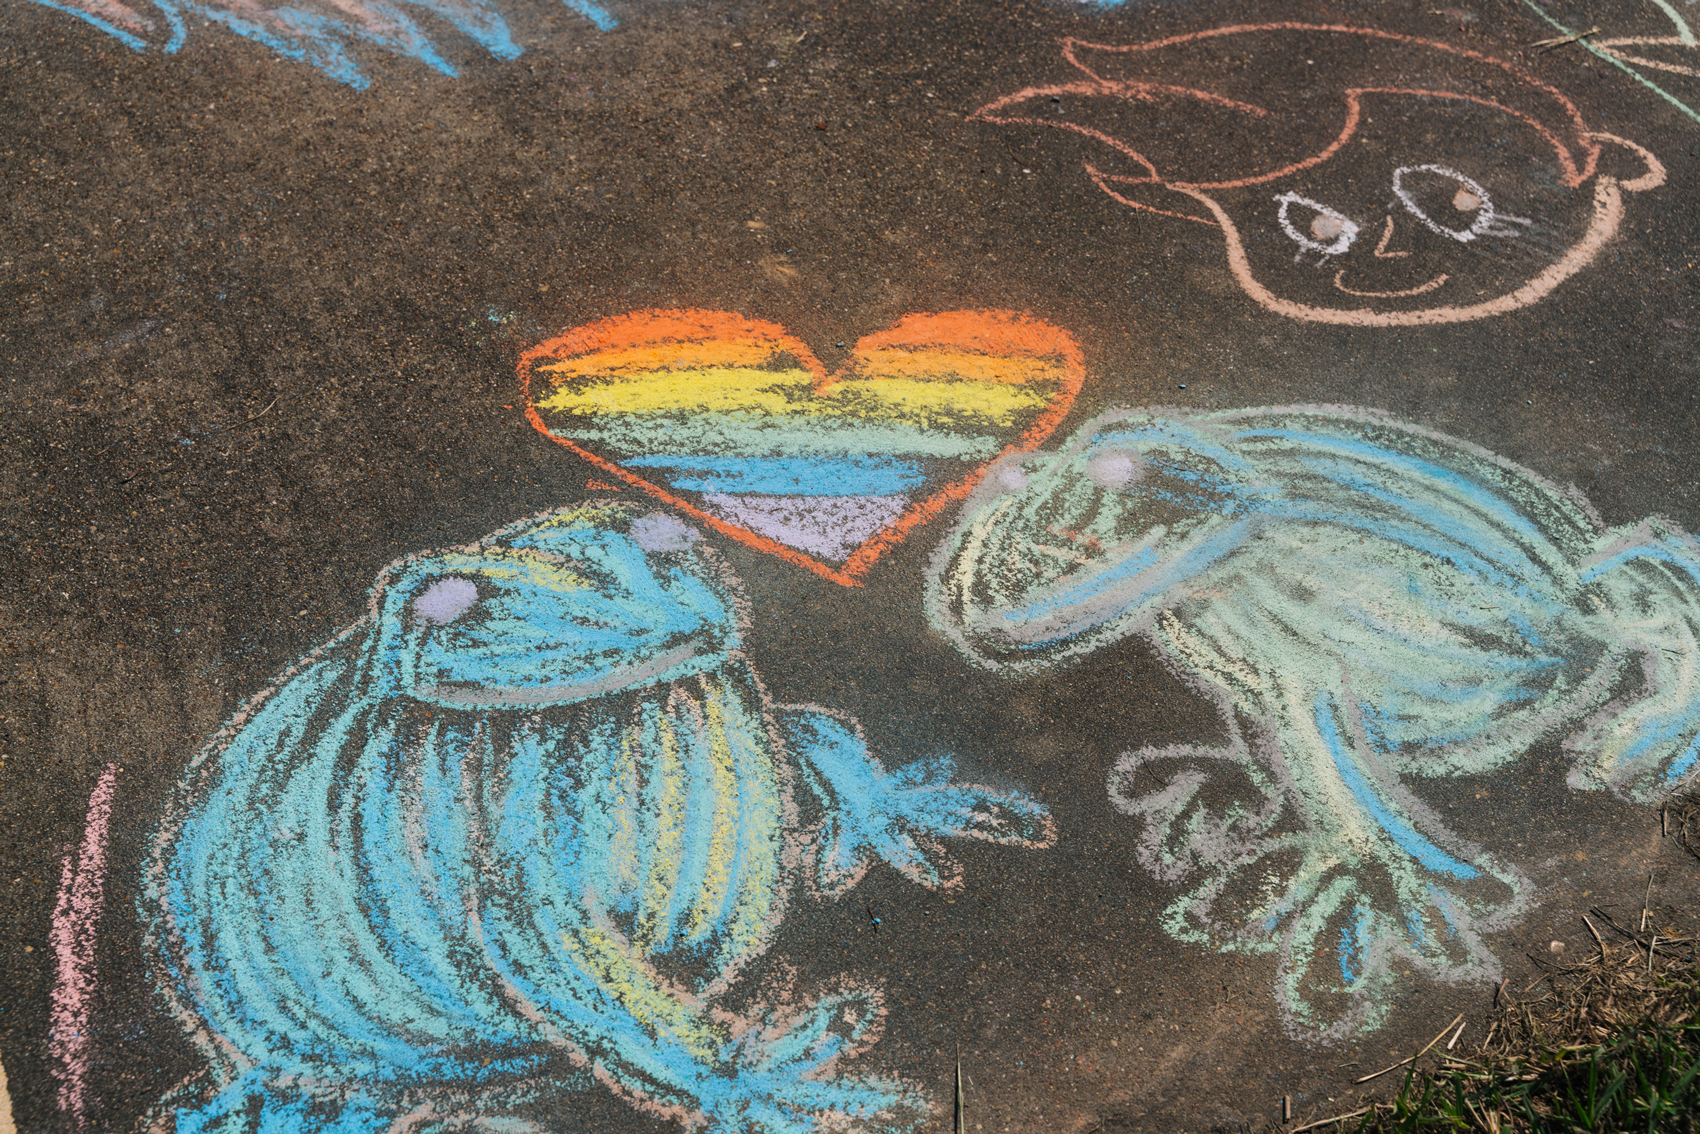 Sidewalk art of frogs during Katy Pride festival at First Christian Church in Katy